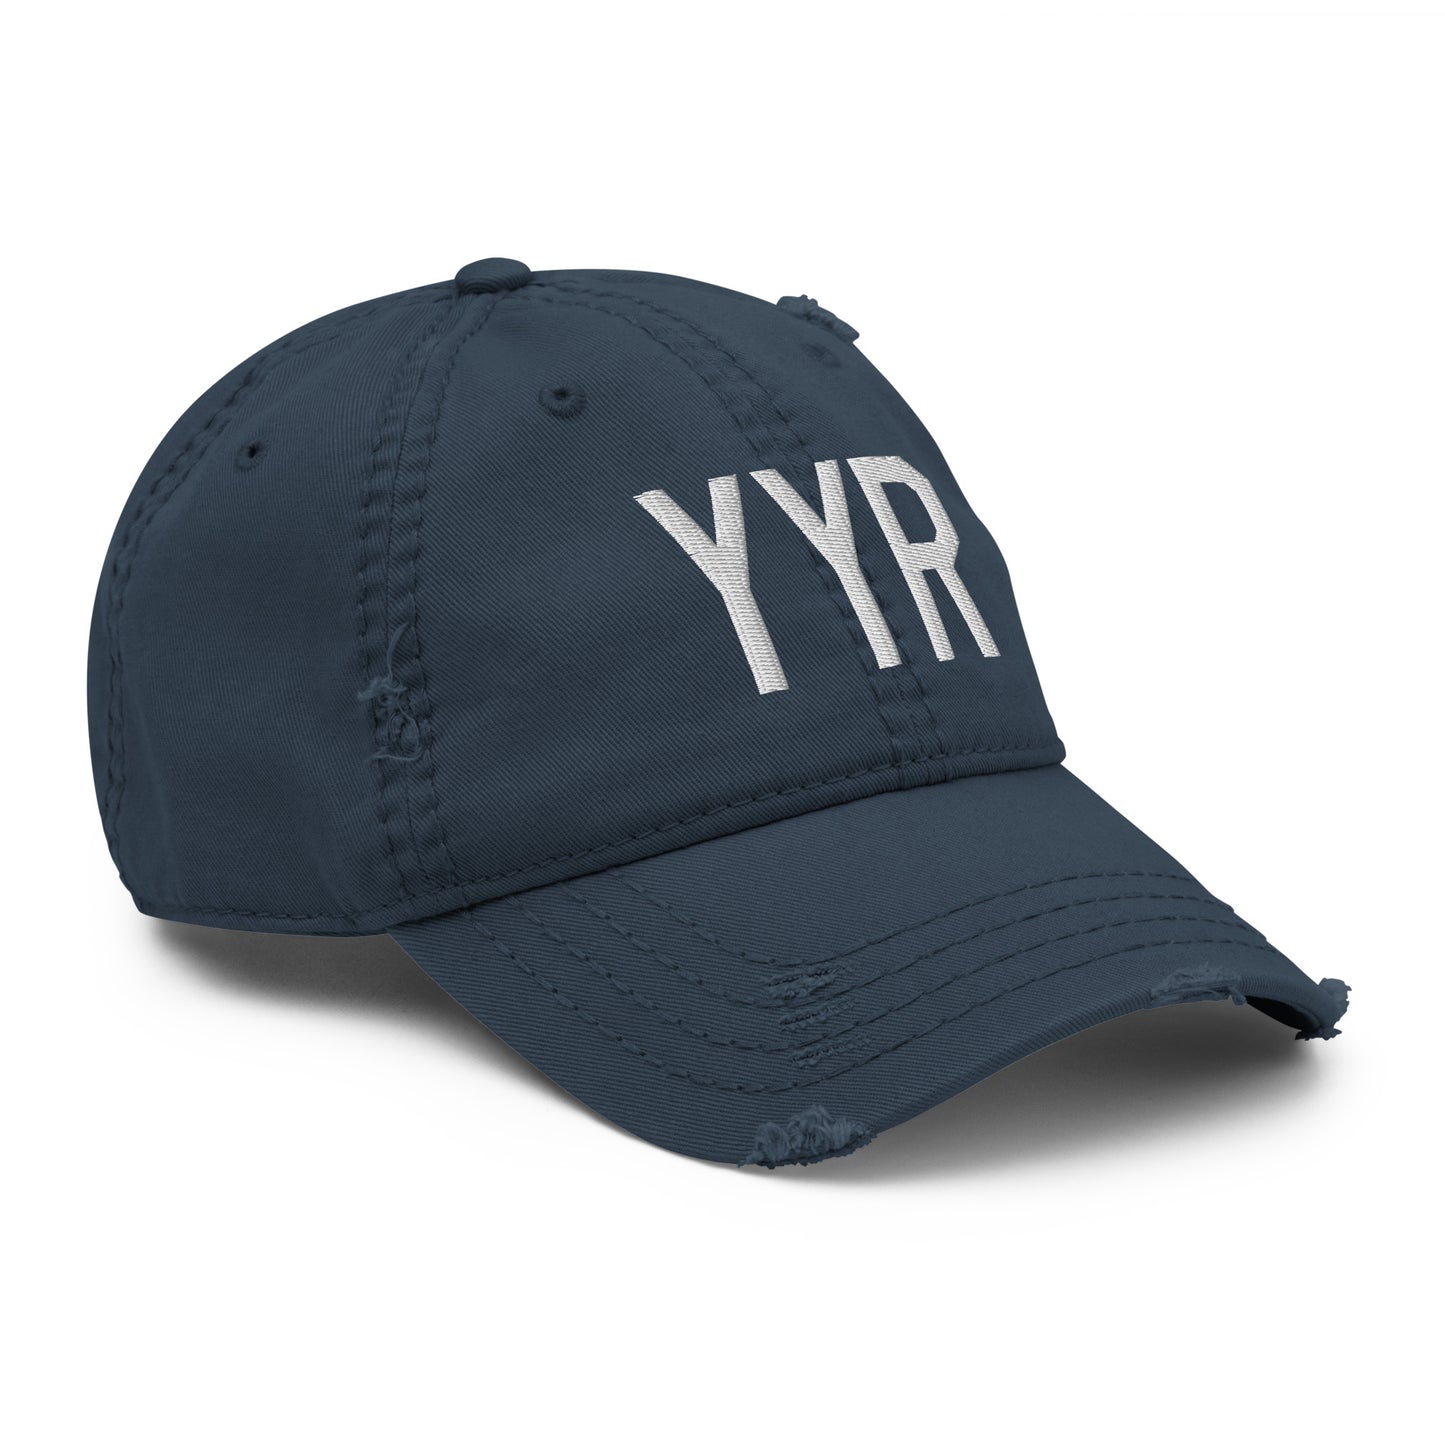 Airport Code Distressed Hat - White • YYR Goose Bay • YHM Designs - Image 14